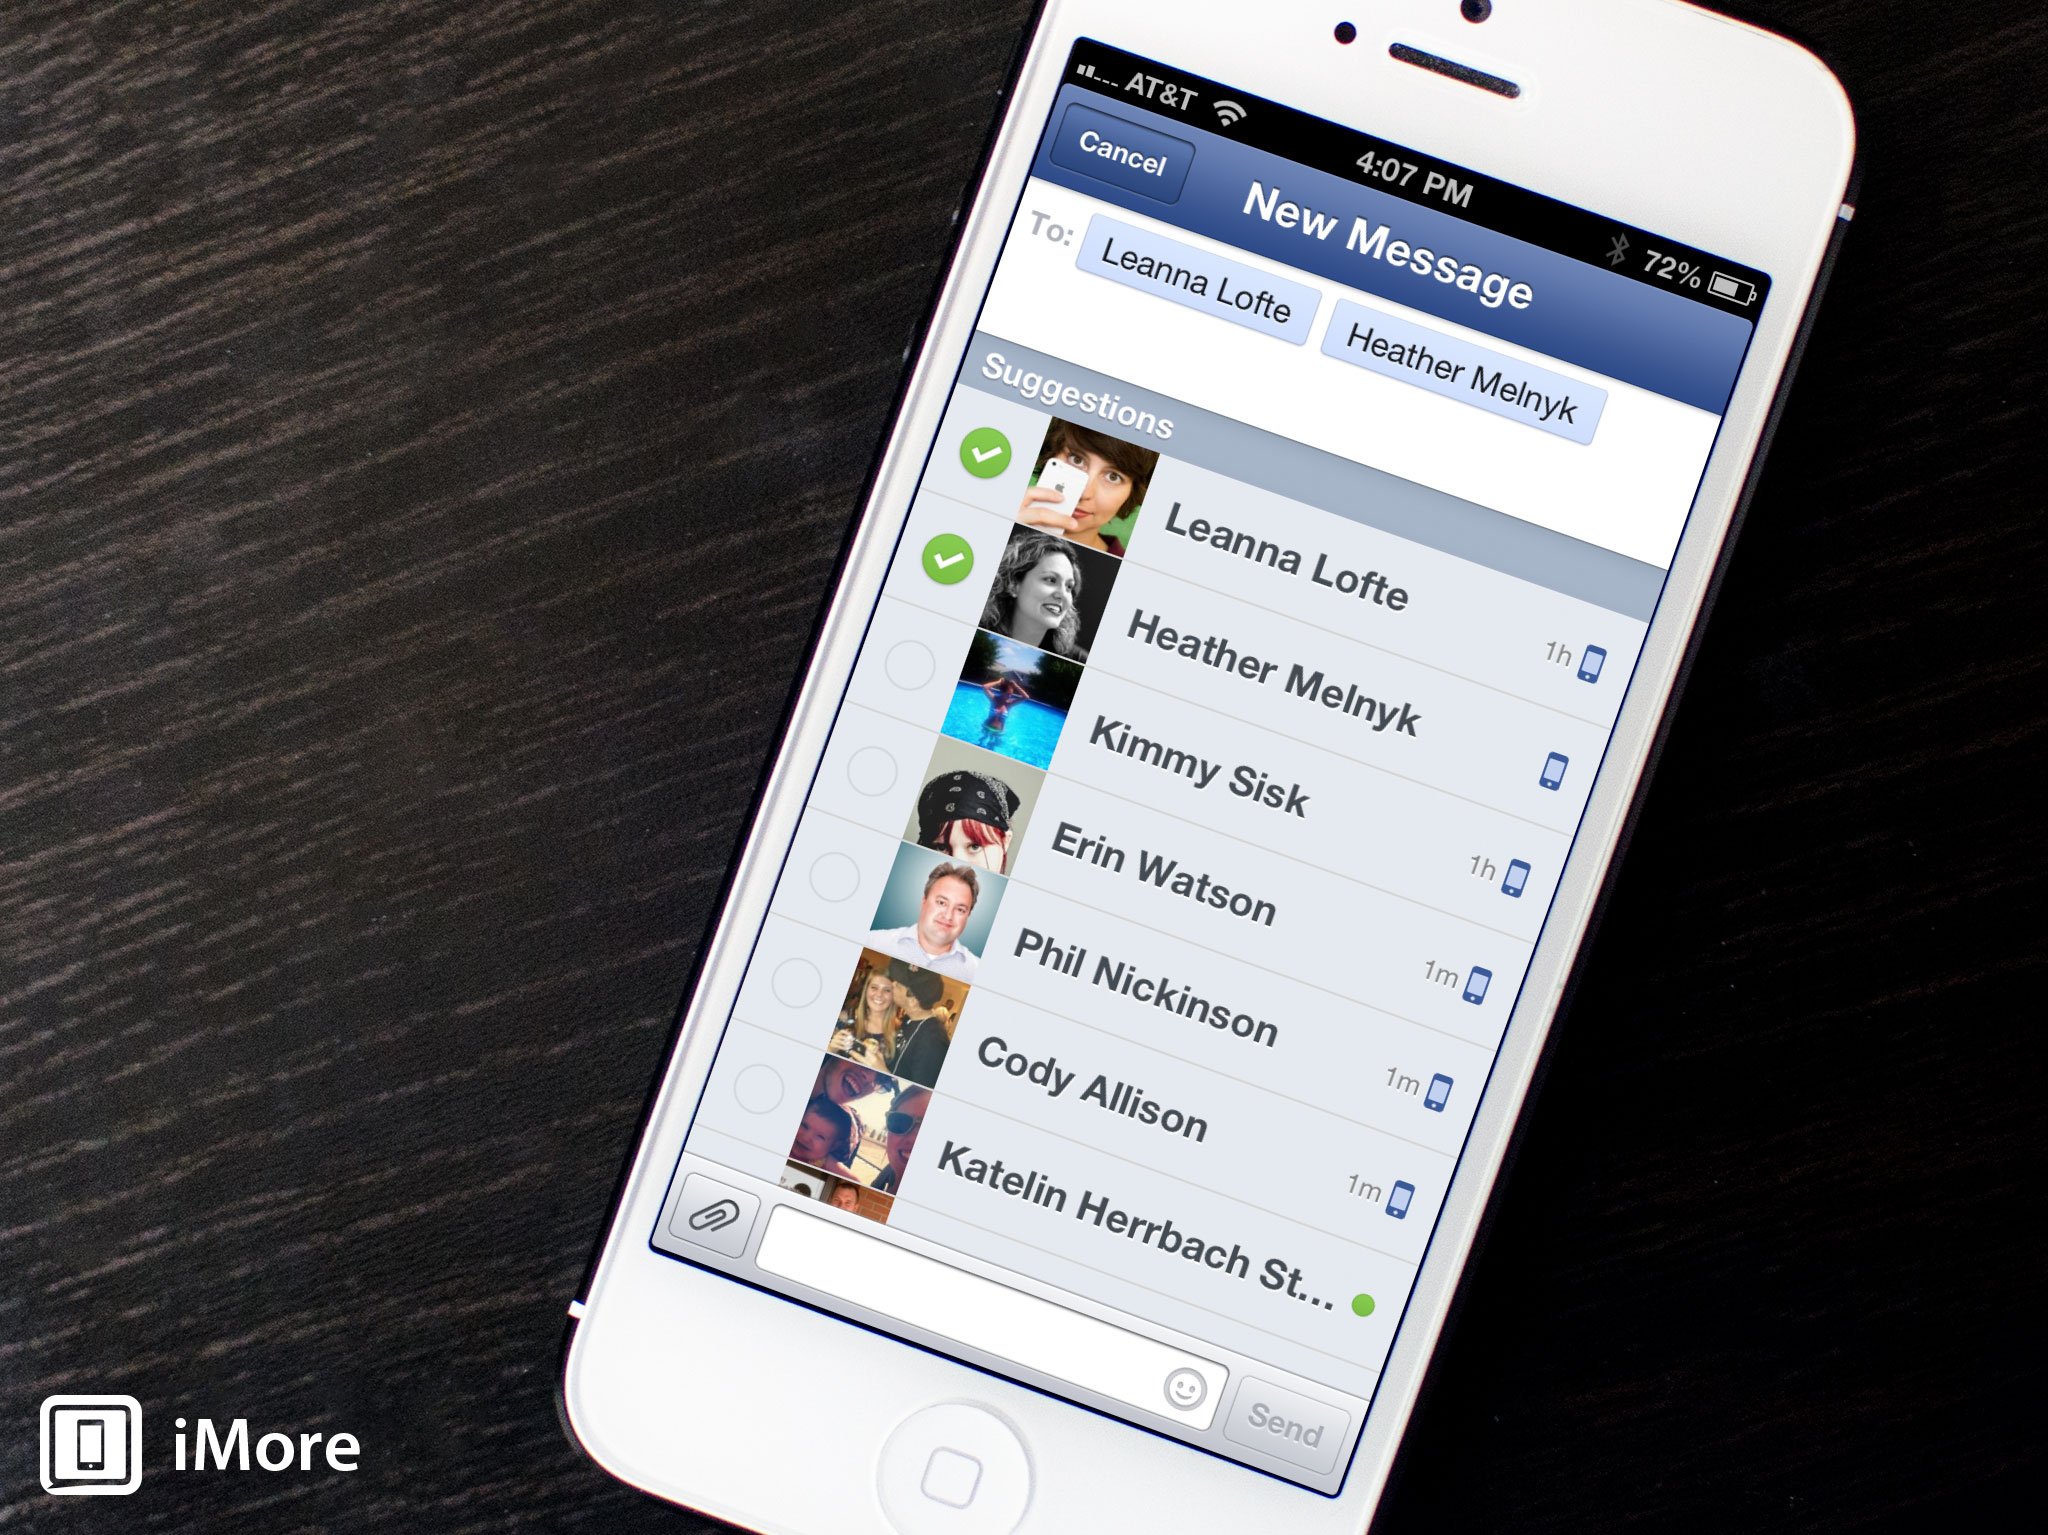 How to create a group chat with Facebook for iPhone and iPad